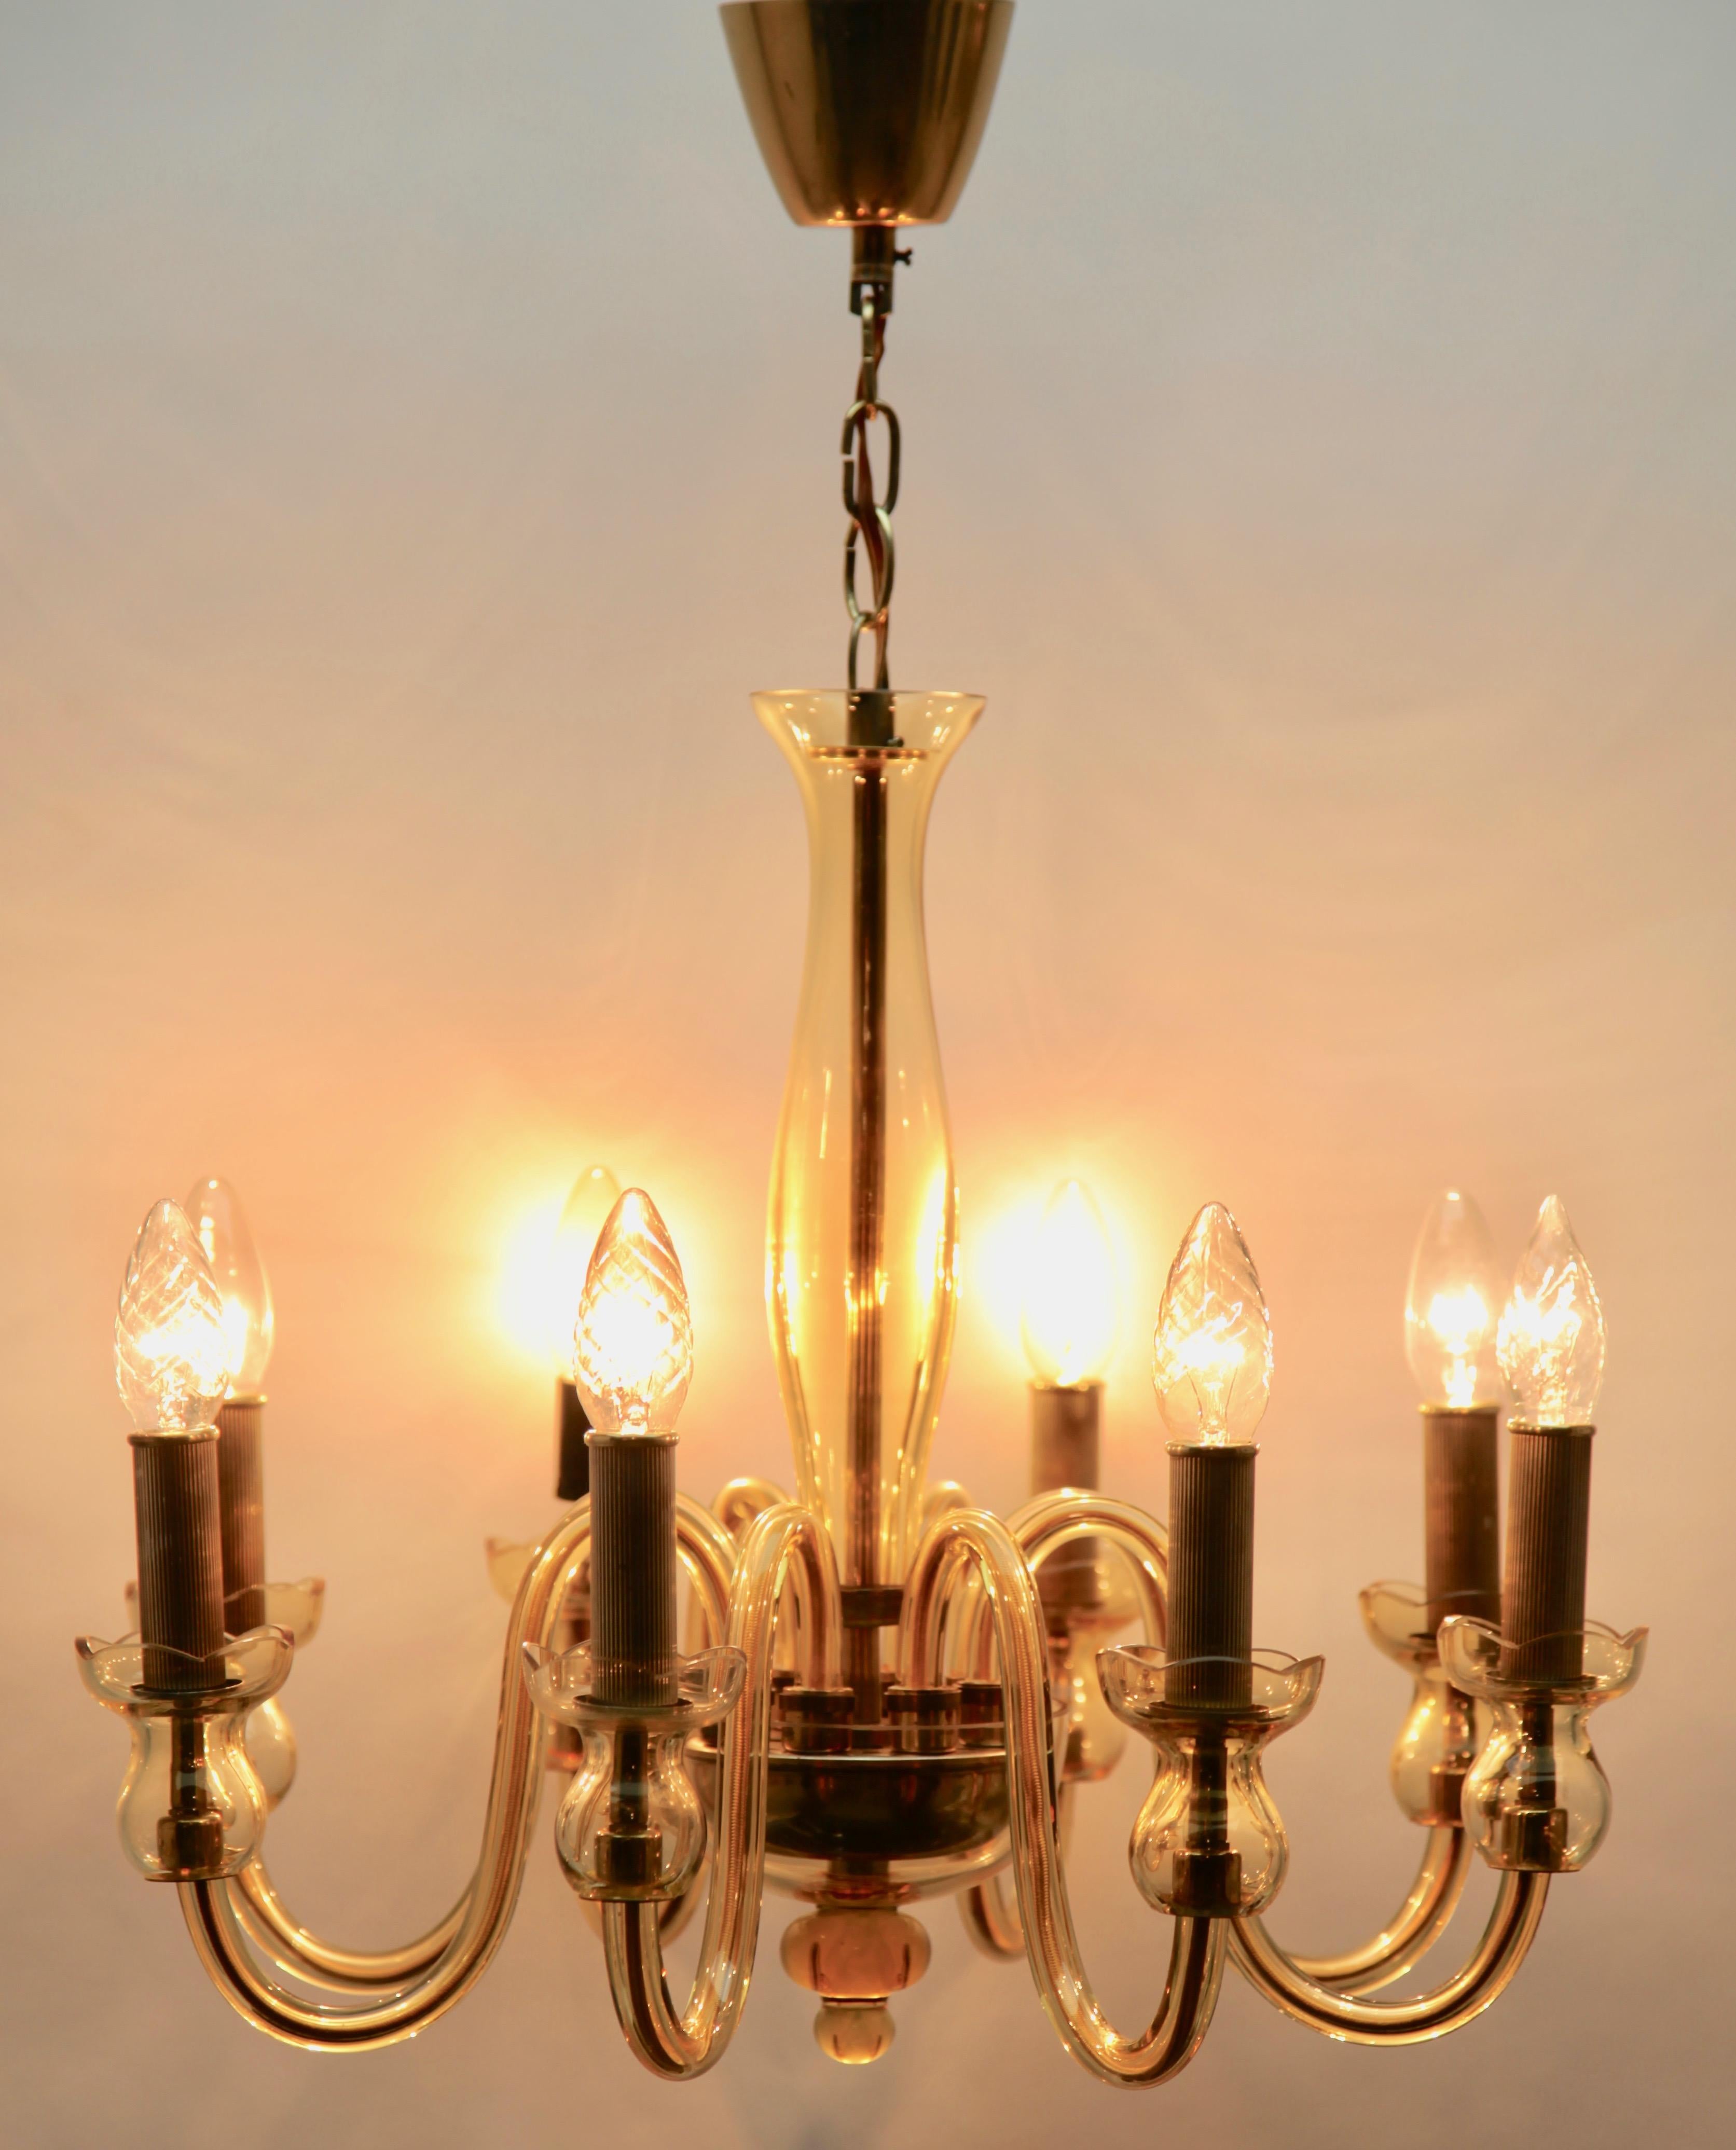 Mid-20th Century Bohemian Chandelier Handcrafted Amber Crystal Murano, 8 Light Arms